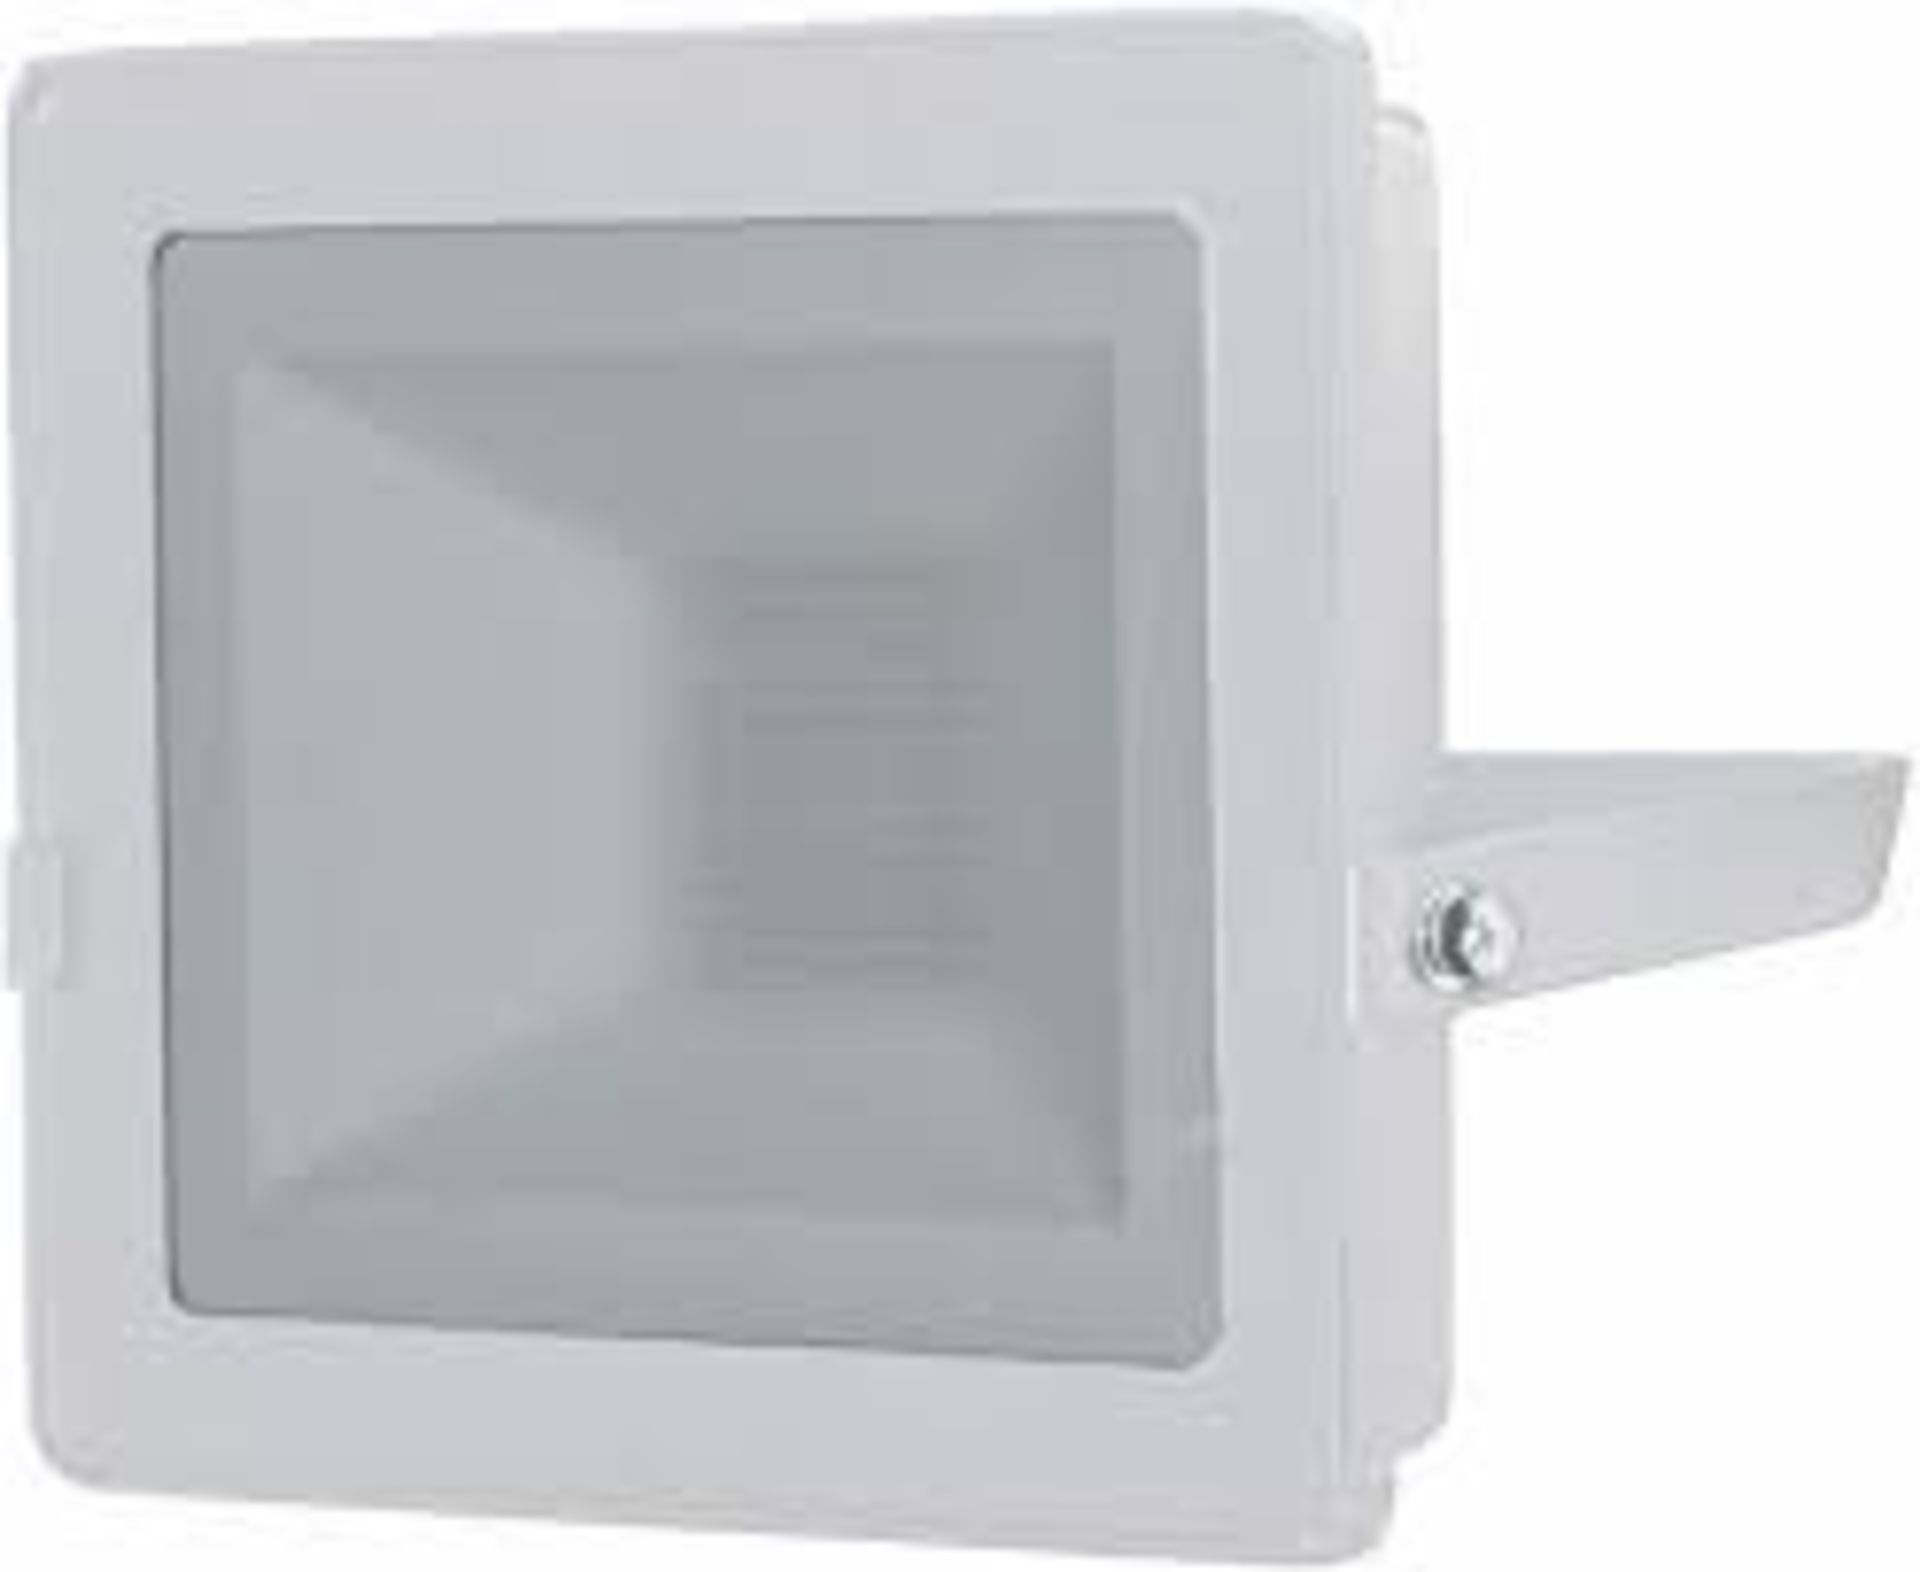 4 X NEW BOXED 20W LED FLOODLIGHT WITH PIR. 1600 LUMEN. 5000K. IP44 RATED. ROW 1 RACK